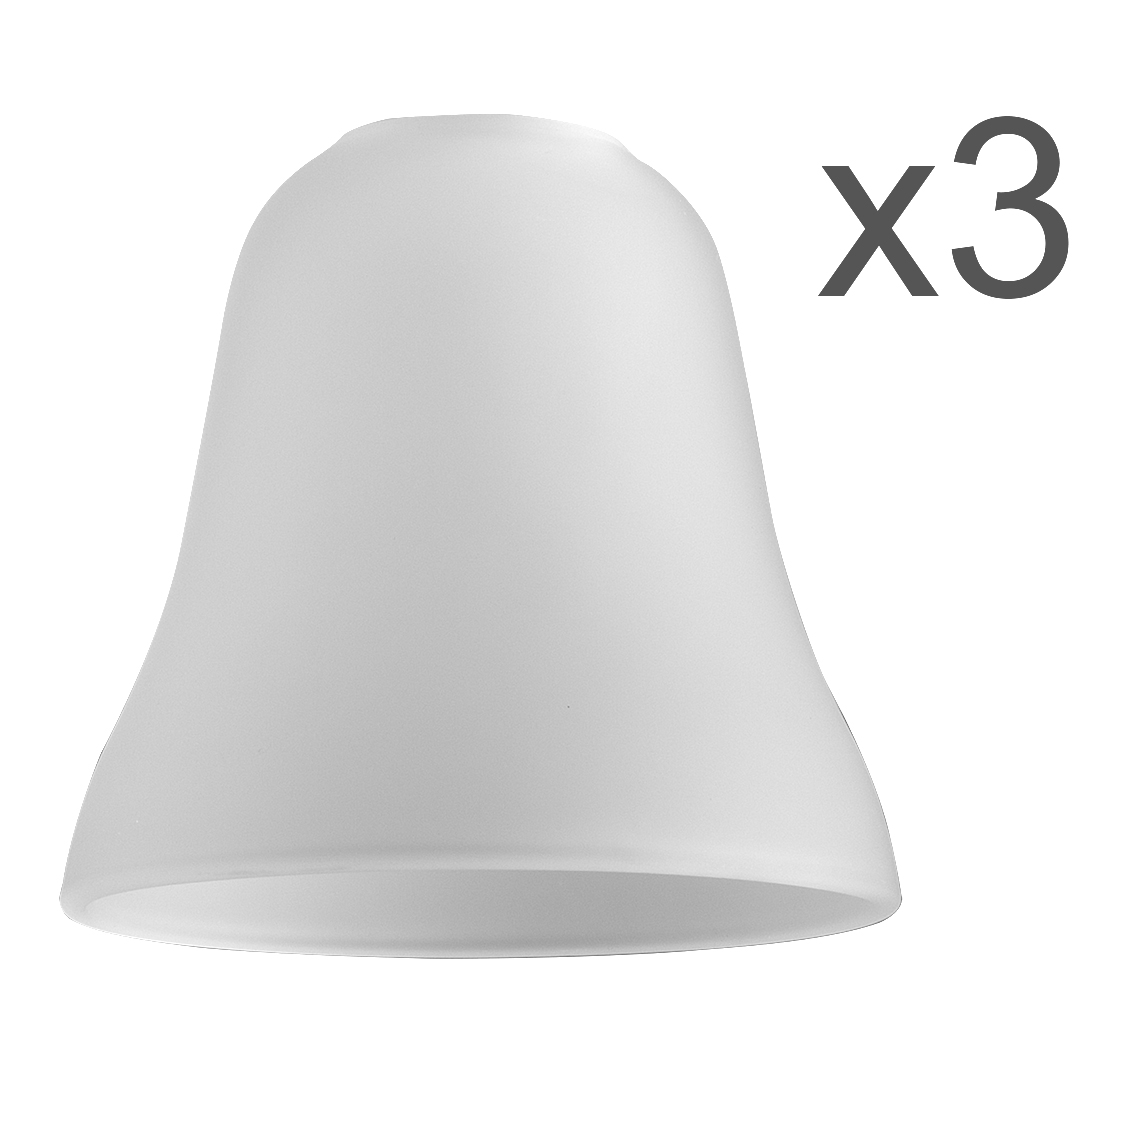  Pack of 3 Bell shaped shades in frosted glass finish 19698 5016529196983